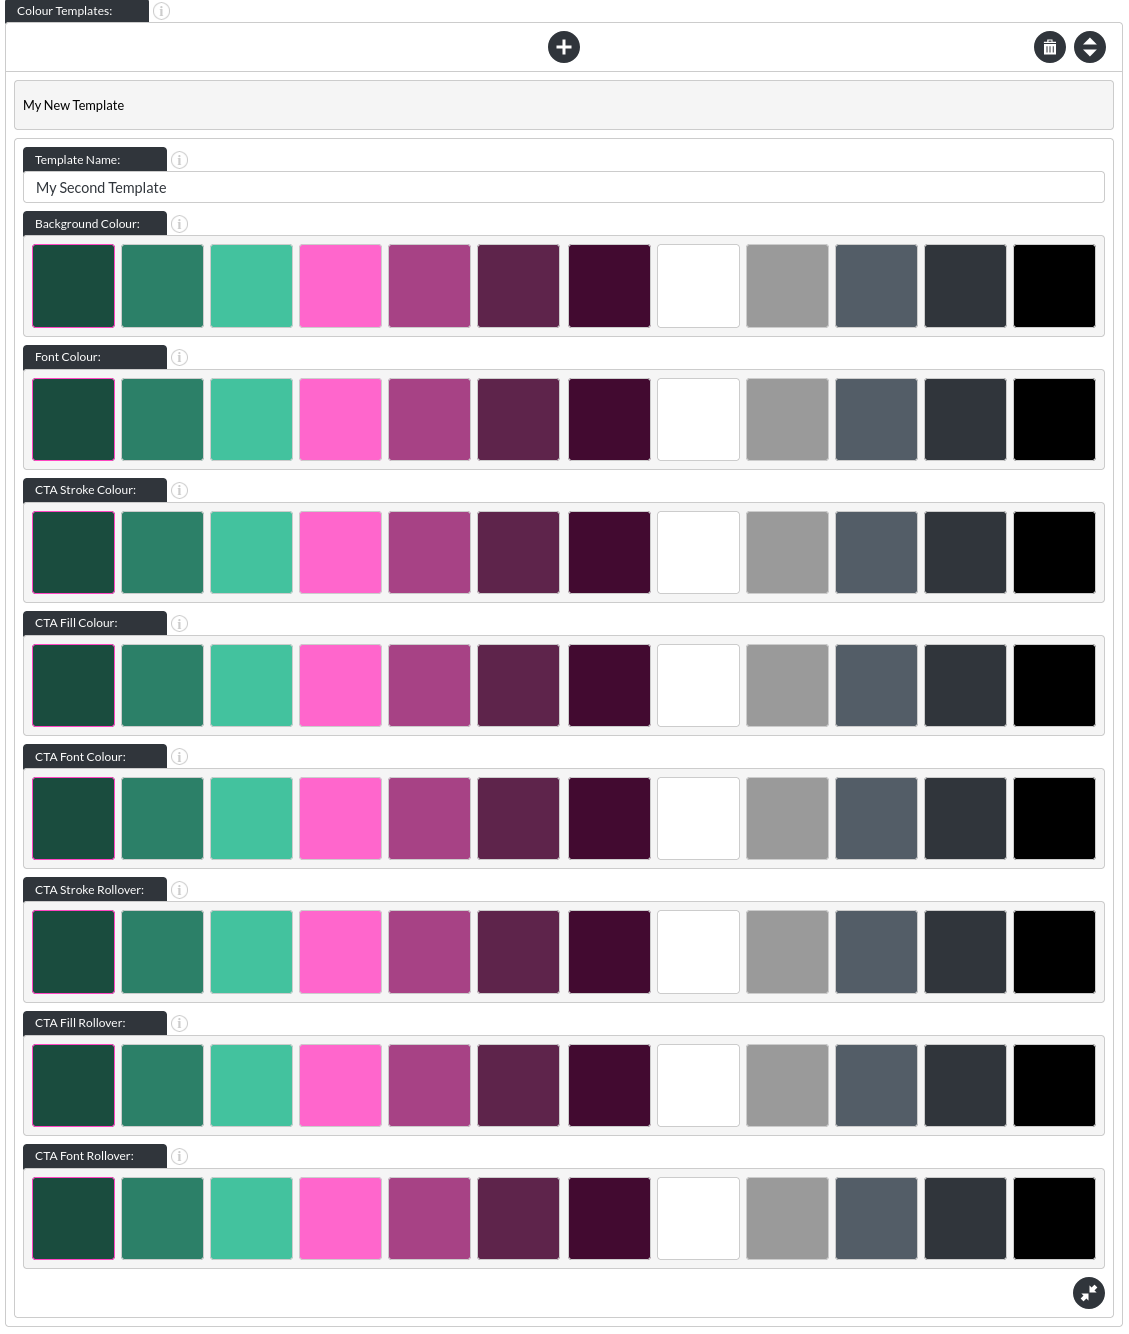 Image of the colour templates functionality